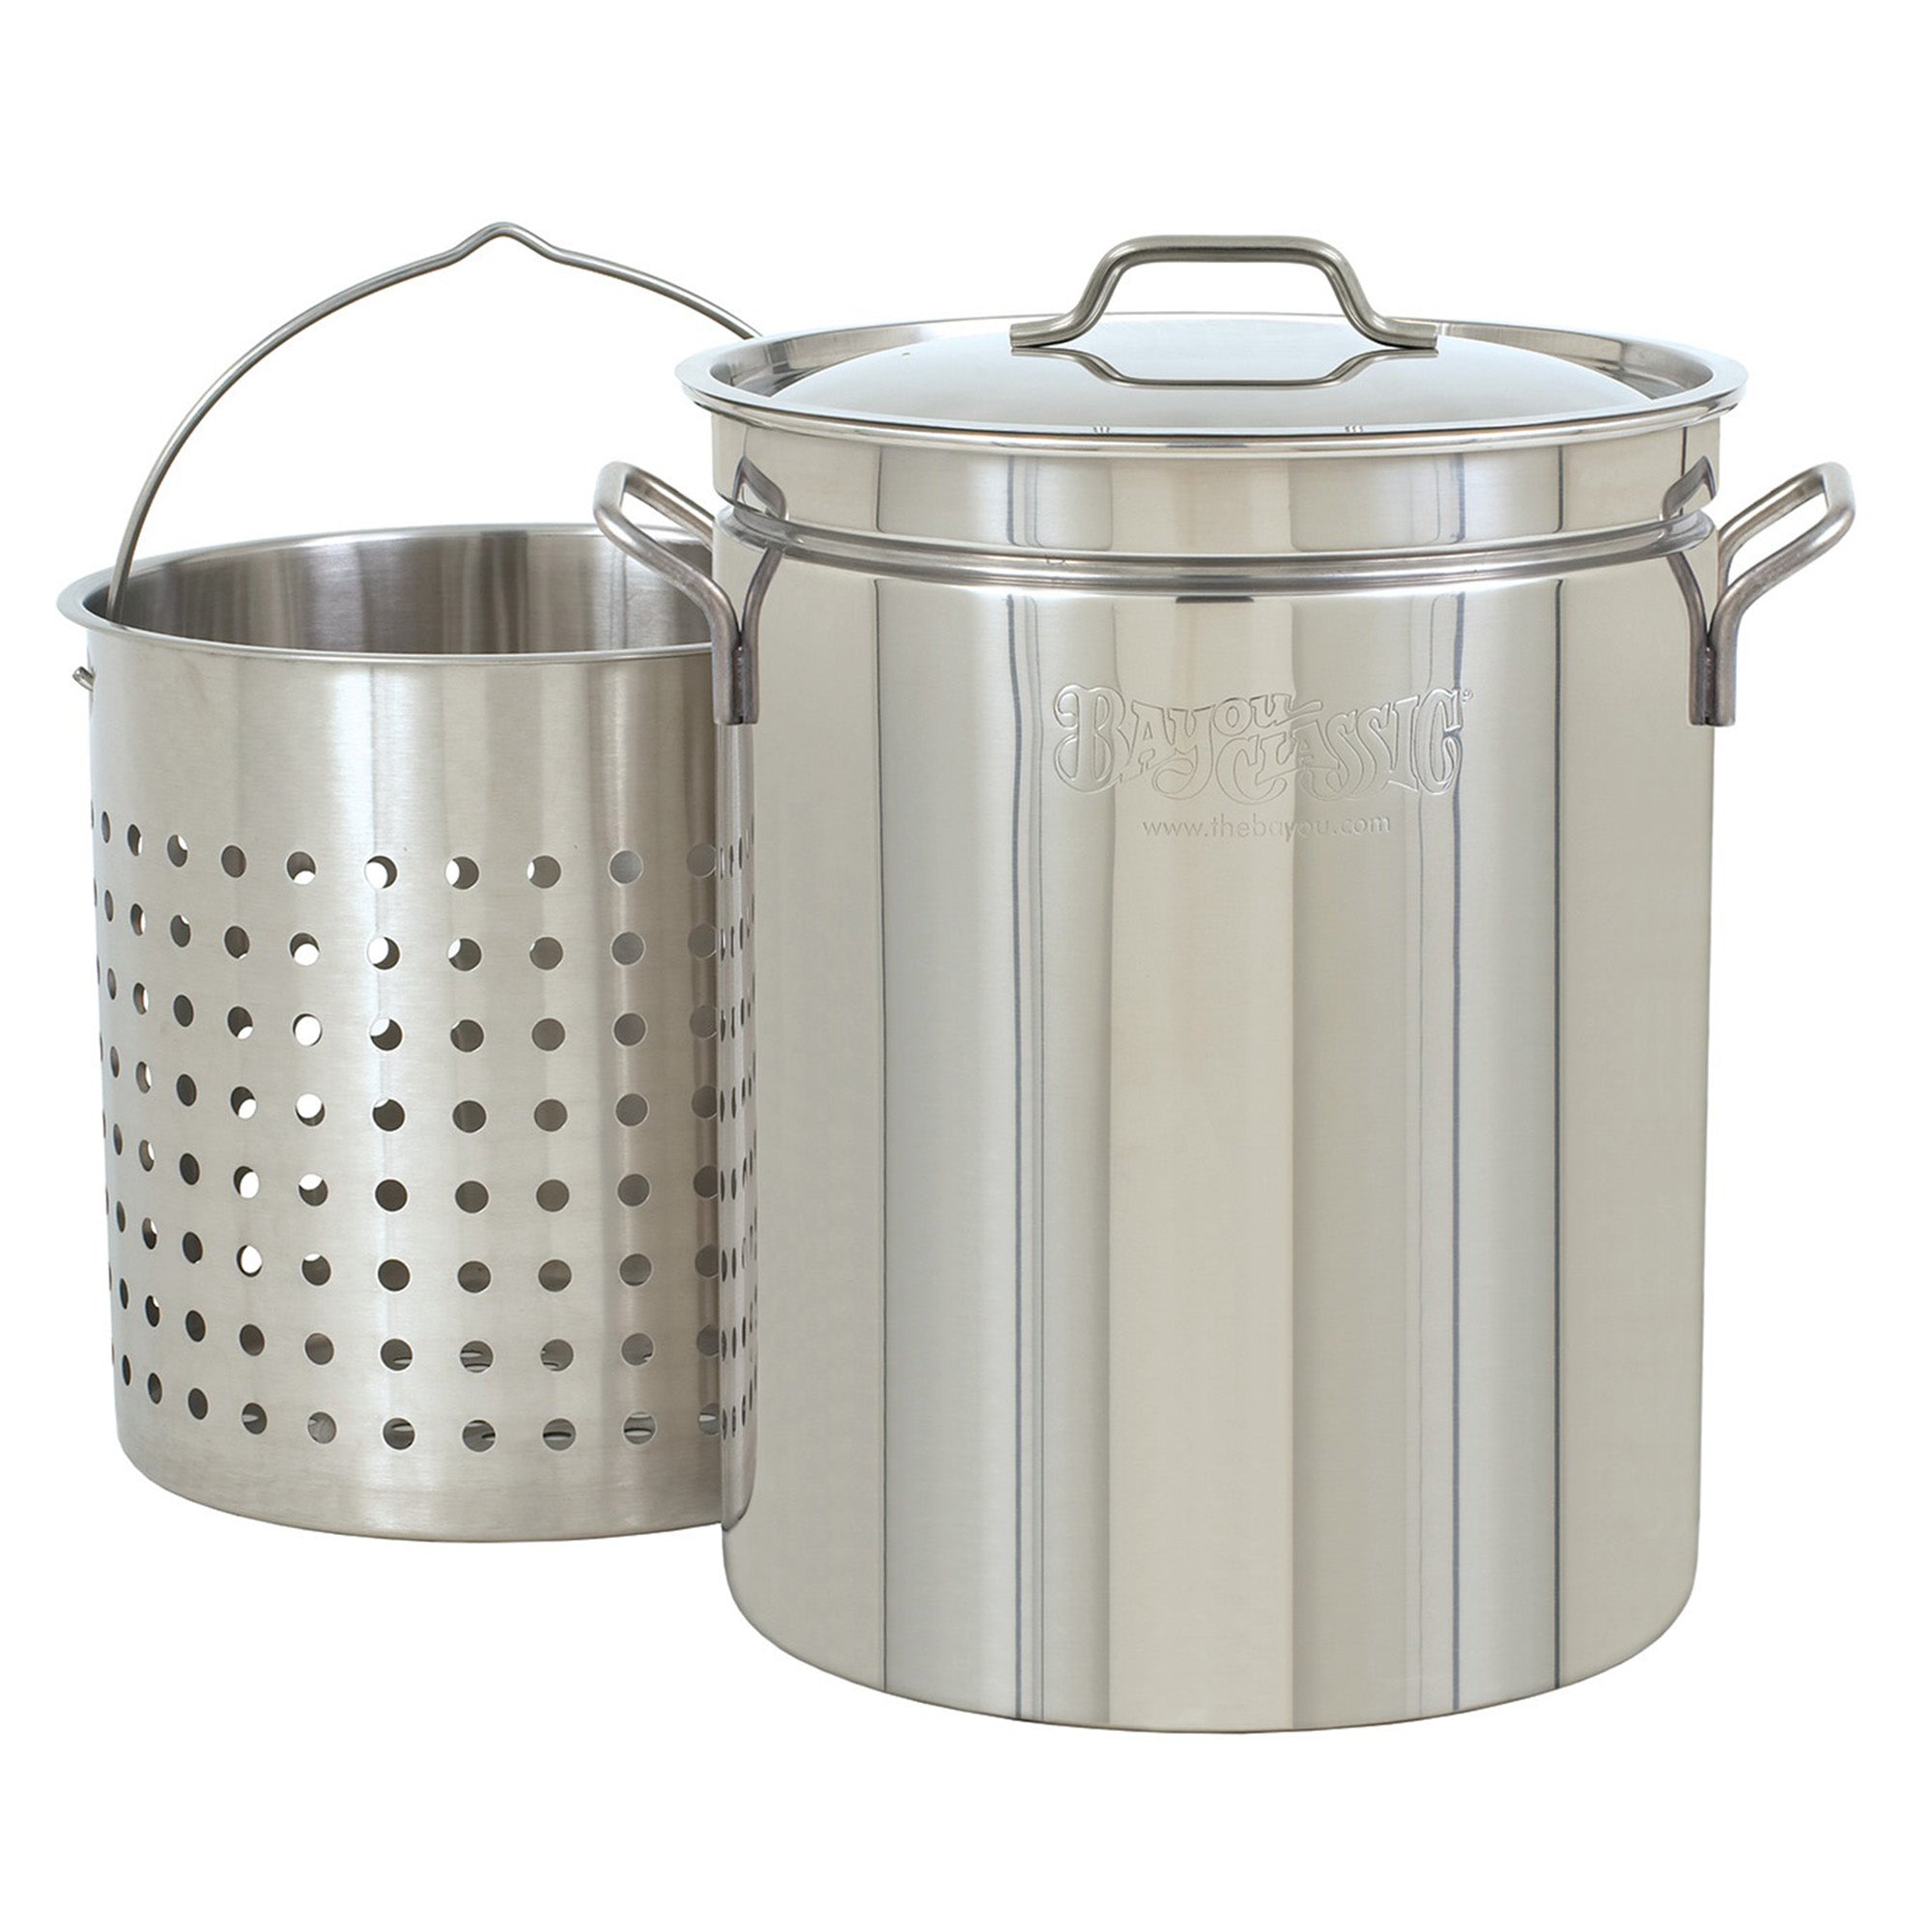 44-qt Stainless Stockpot with Lid and Basket